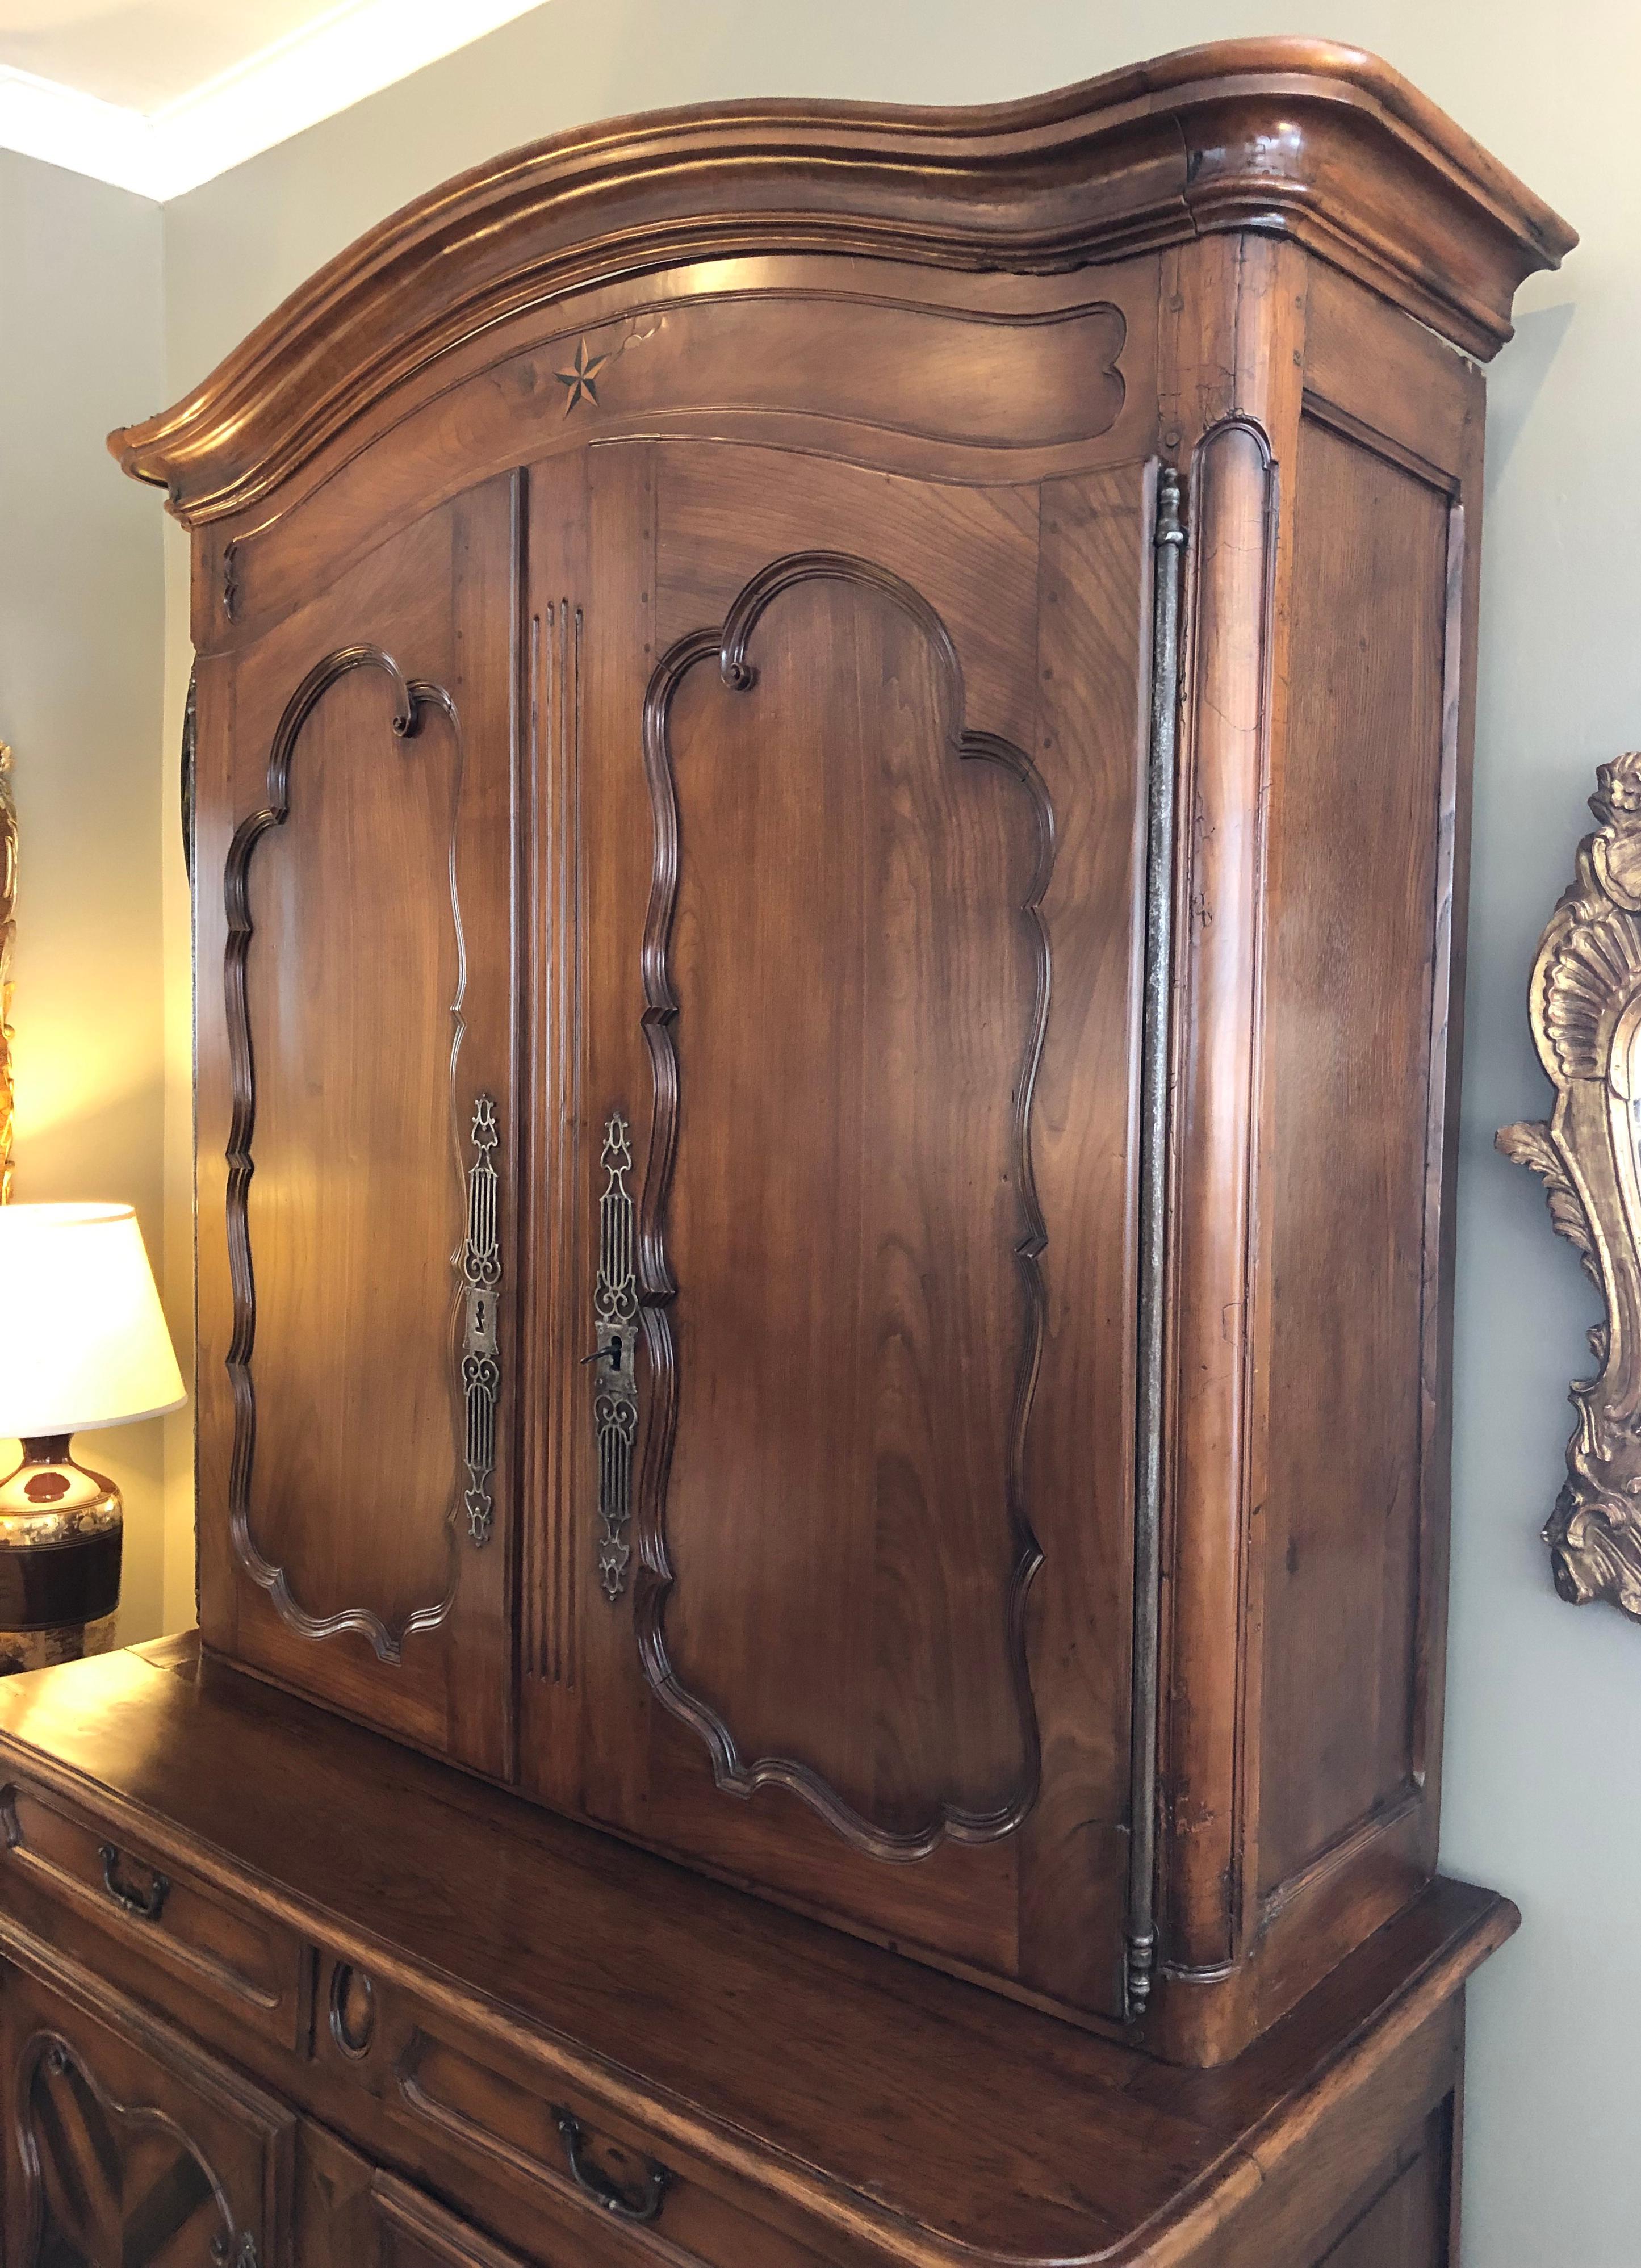 In two pieces, the dramatic arching crest above a two-door cabinet resting on a base fitted with two short drawers over 2 doors.